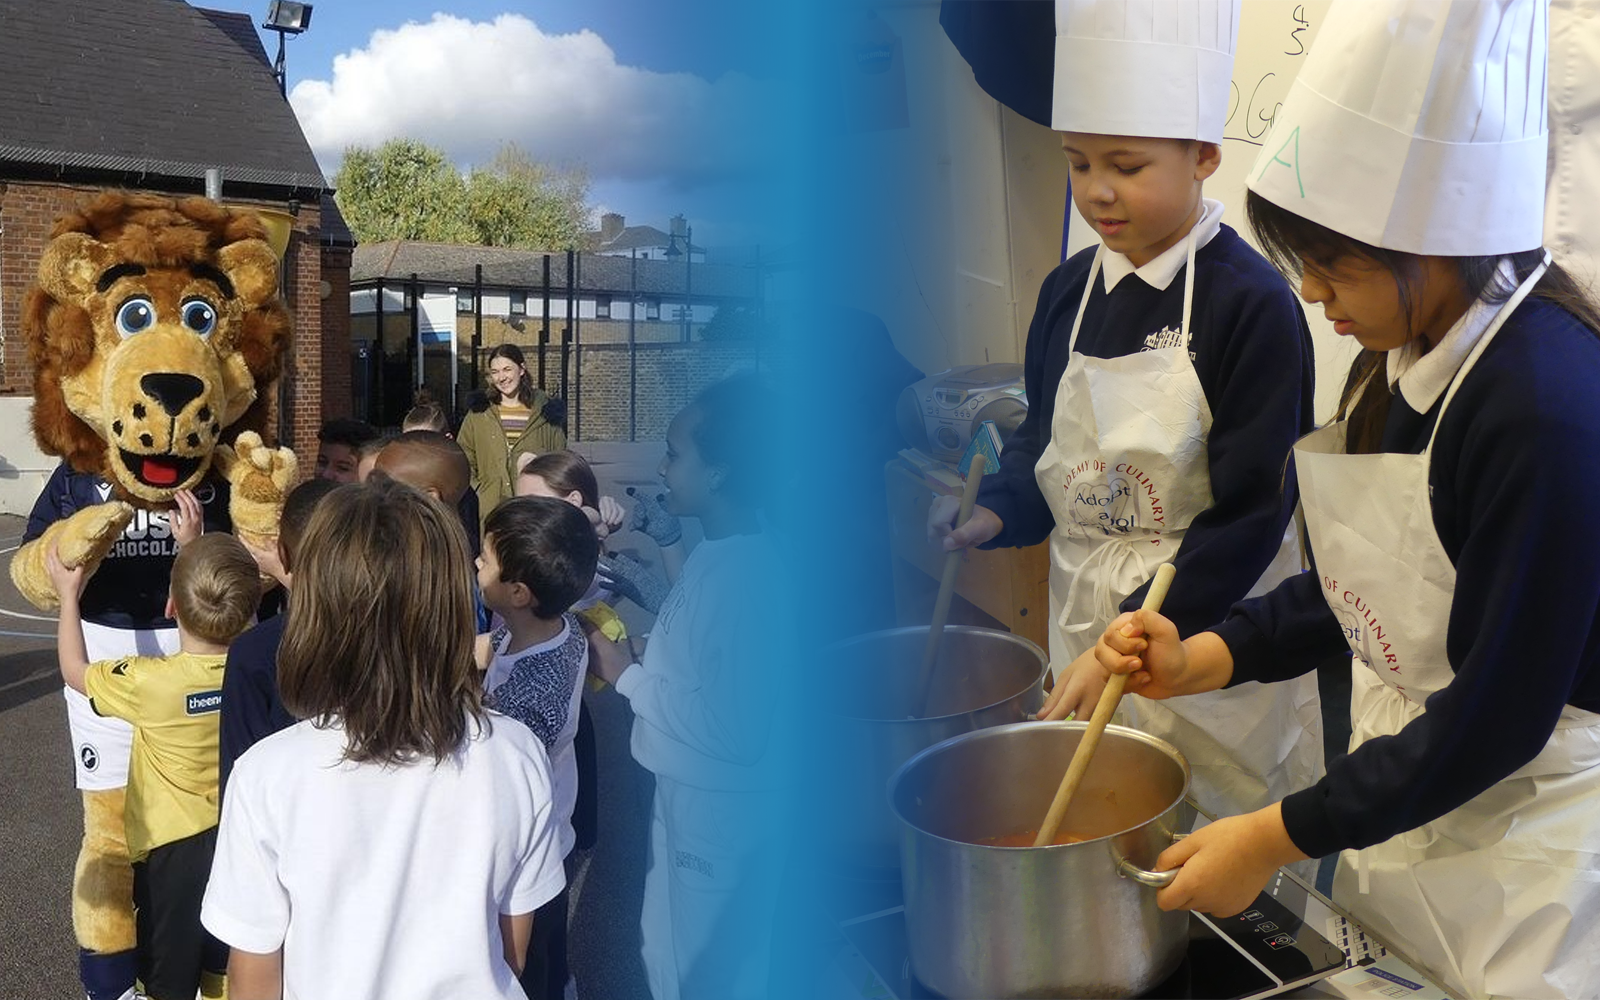 Millwall Community Trust deliver successful 'Kick and cook' programme.